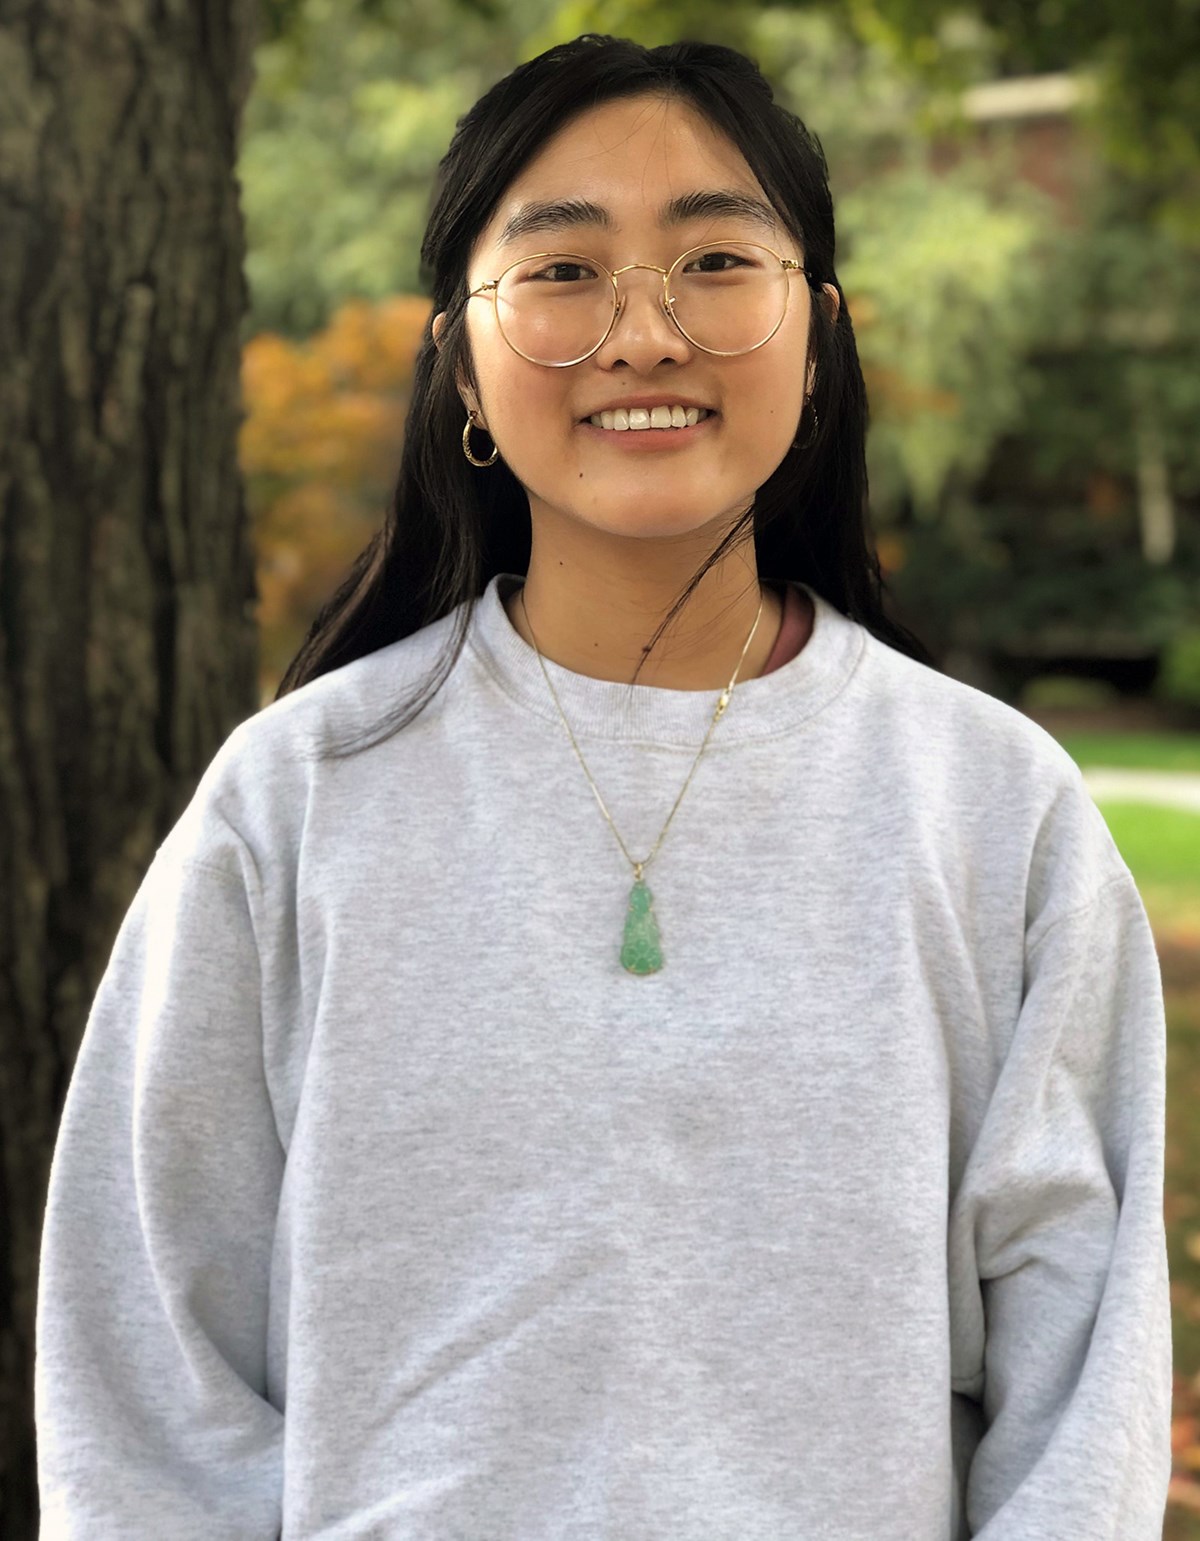 Grace Truong is a nursing major with a minor in public health from North Andover, MA. She enjoys photography, writing poetry, and playing with her dog. Her favorite thing about UML is the supportive campus: in high school, it didn’t feel like everyone supported each other, but here, everyone wants each other to succeed. She also likes the fact that everything on campus is close and accessible and that the university really feels like a community, rather than just a place to learn.